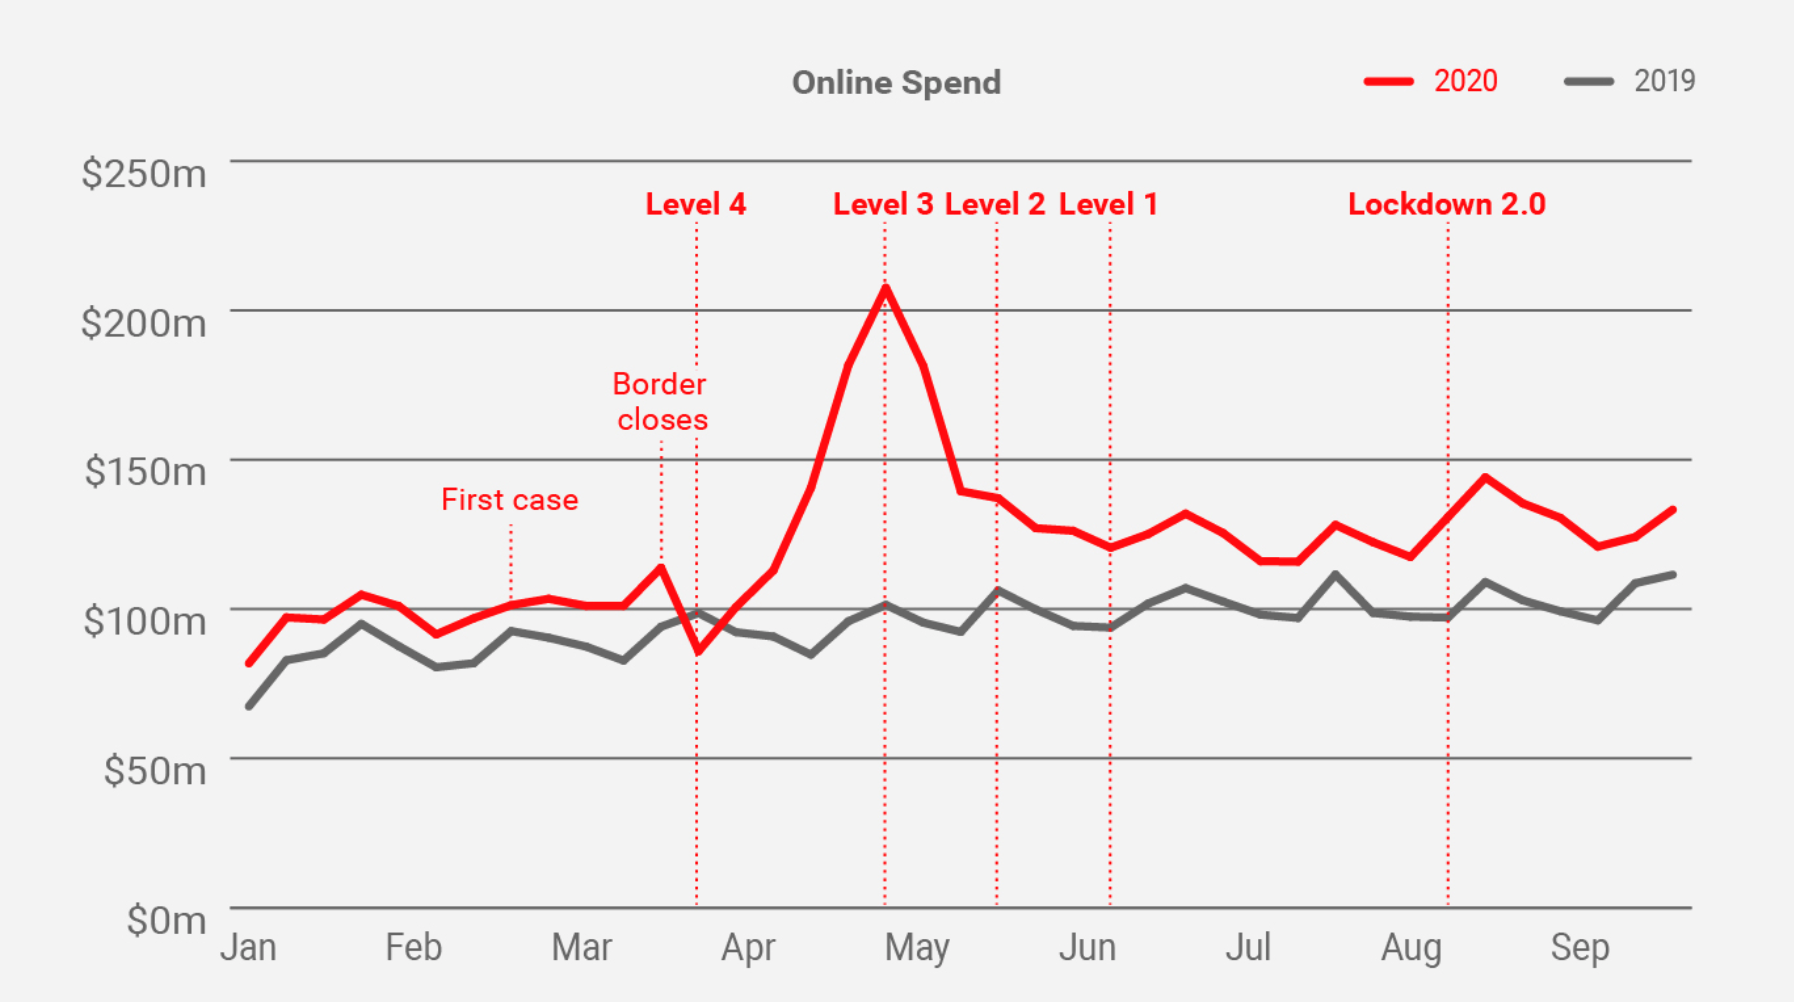 Online Spend between Jan and September 2020 and 2019 in New Zealand